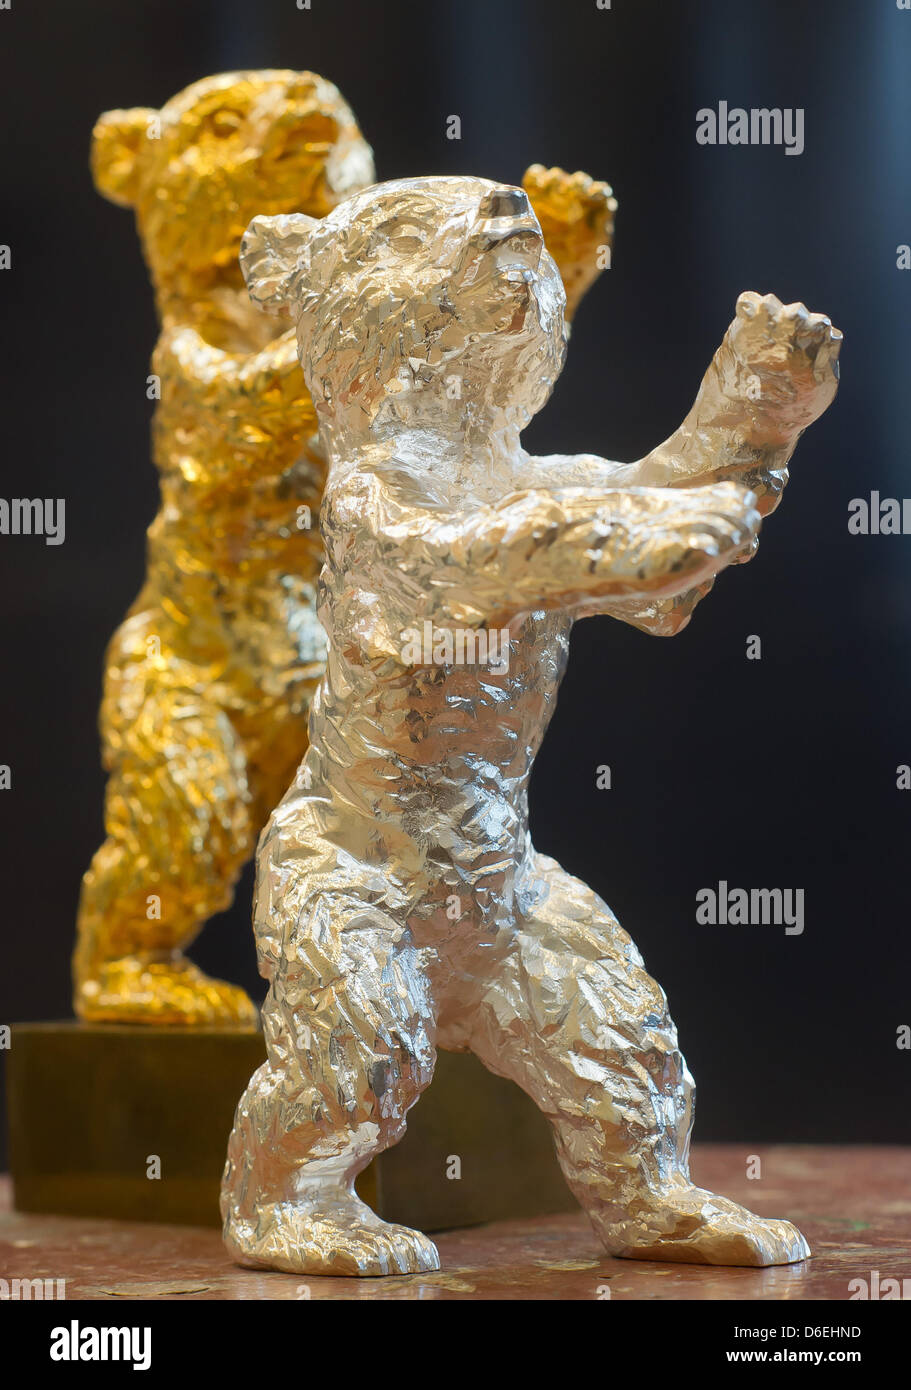 A silver and a golden Bear, the awards of the Berlinale, are pictured in a workshop of the sculpture foundry Hermann Noack in Berlin, Germany, 02 February 2012. The 62nd Berlin International Film Festival will take place from 09 till 19 February 2012 during which the silver and golden bears will be awarded. Photo: TIM BRAKEMEIER Stock Photo